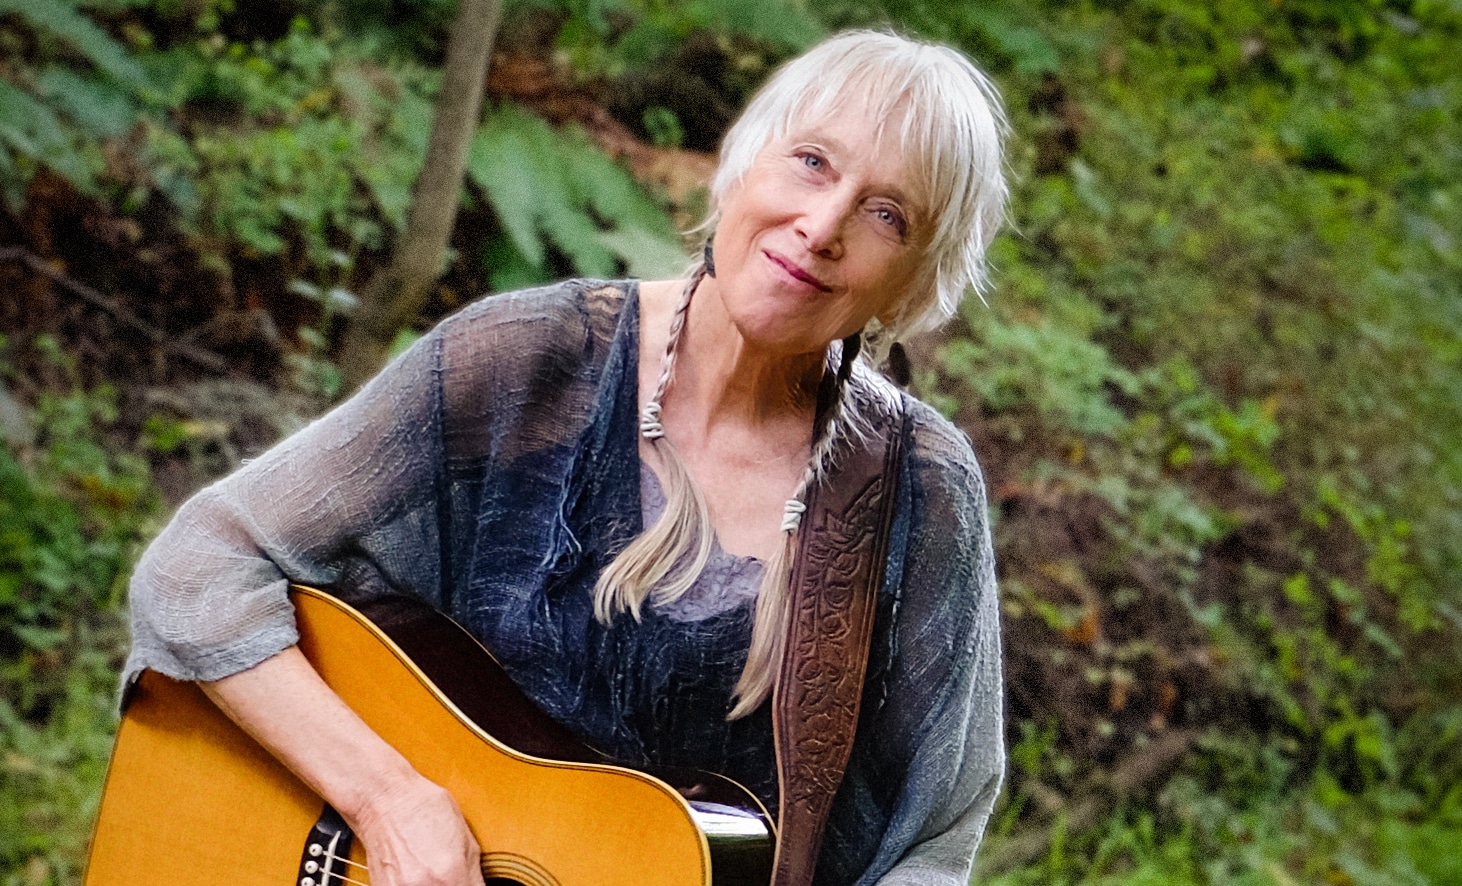 Laurie Lewis Releases “Troubled Times” With Guest Vocalist, Leah Wollenberg